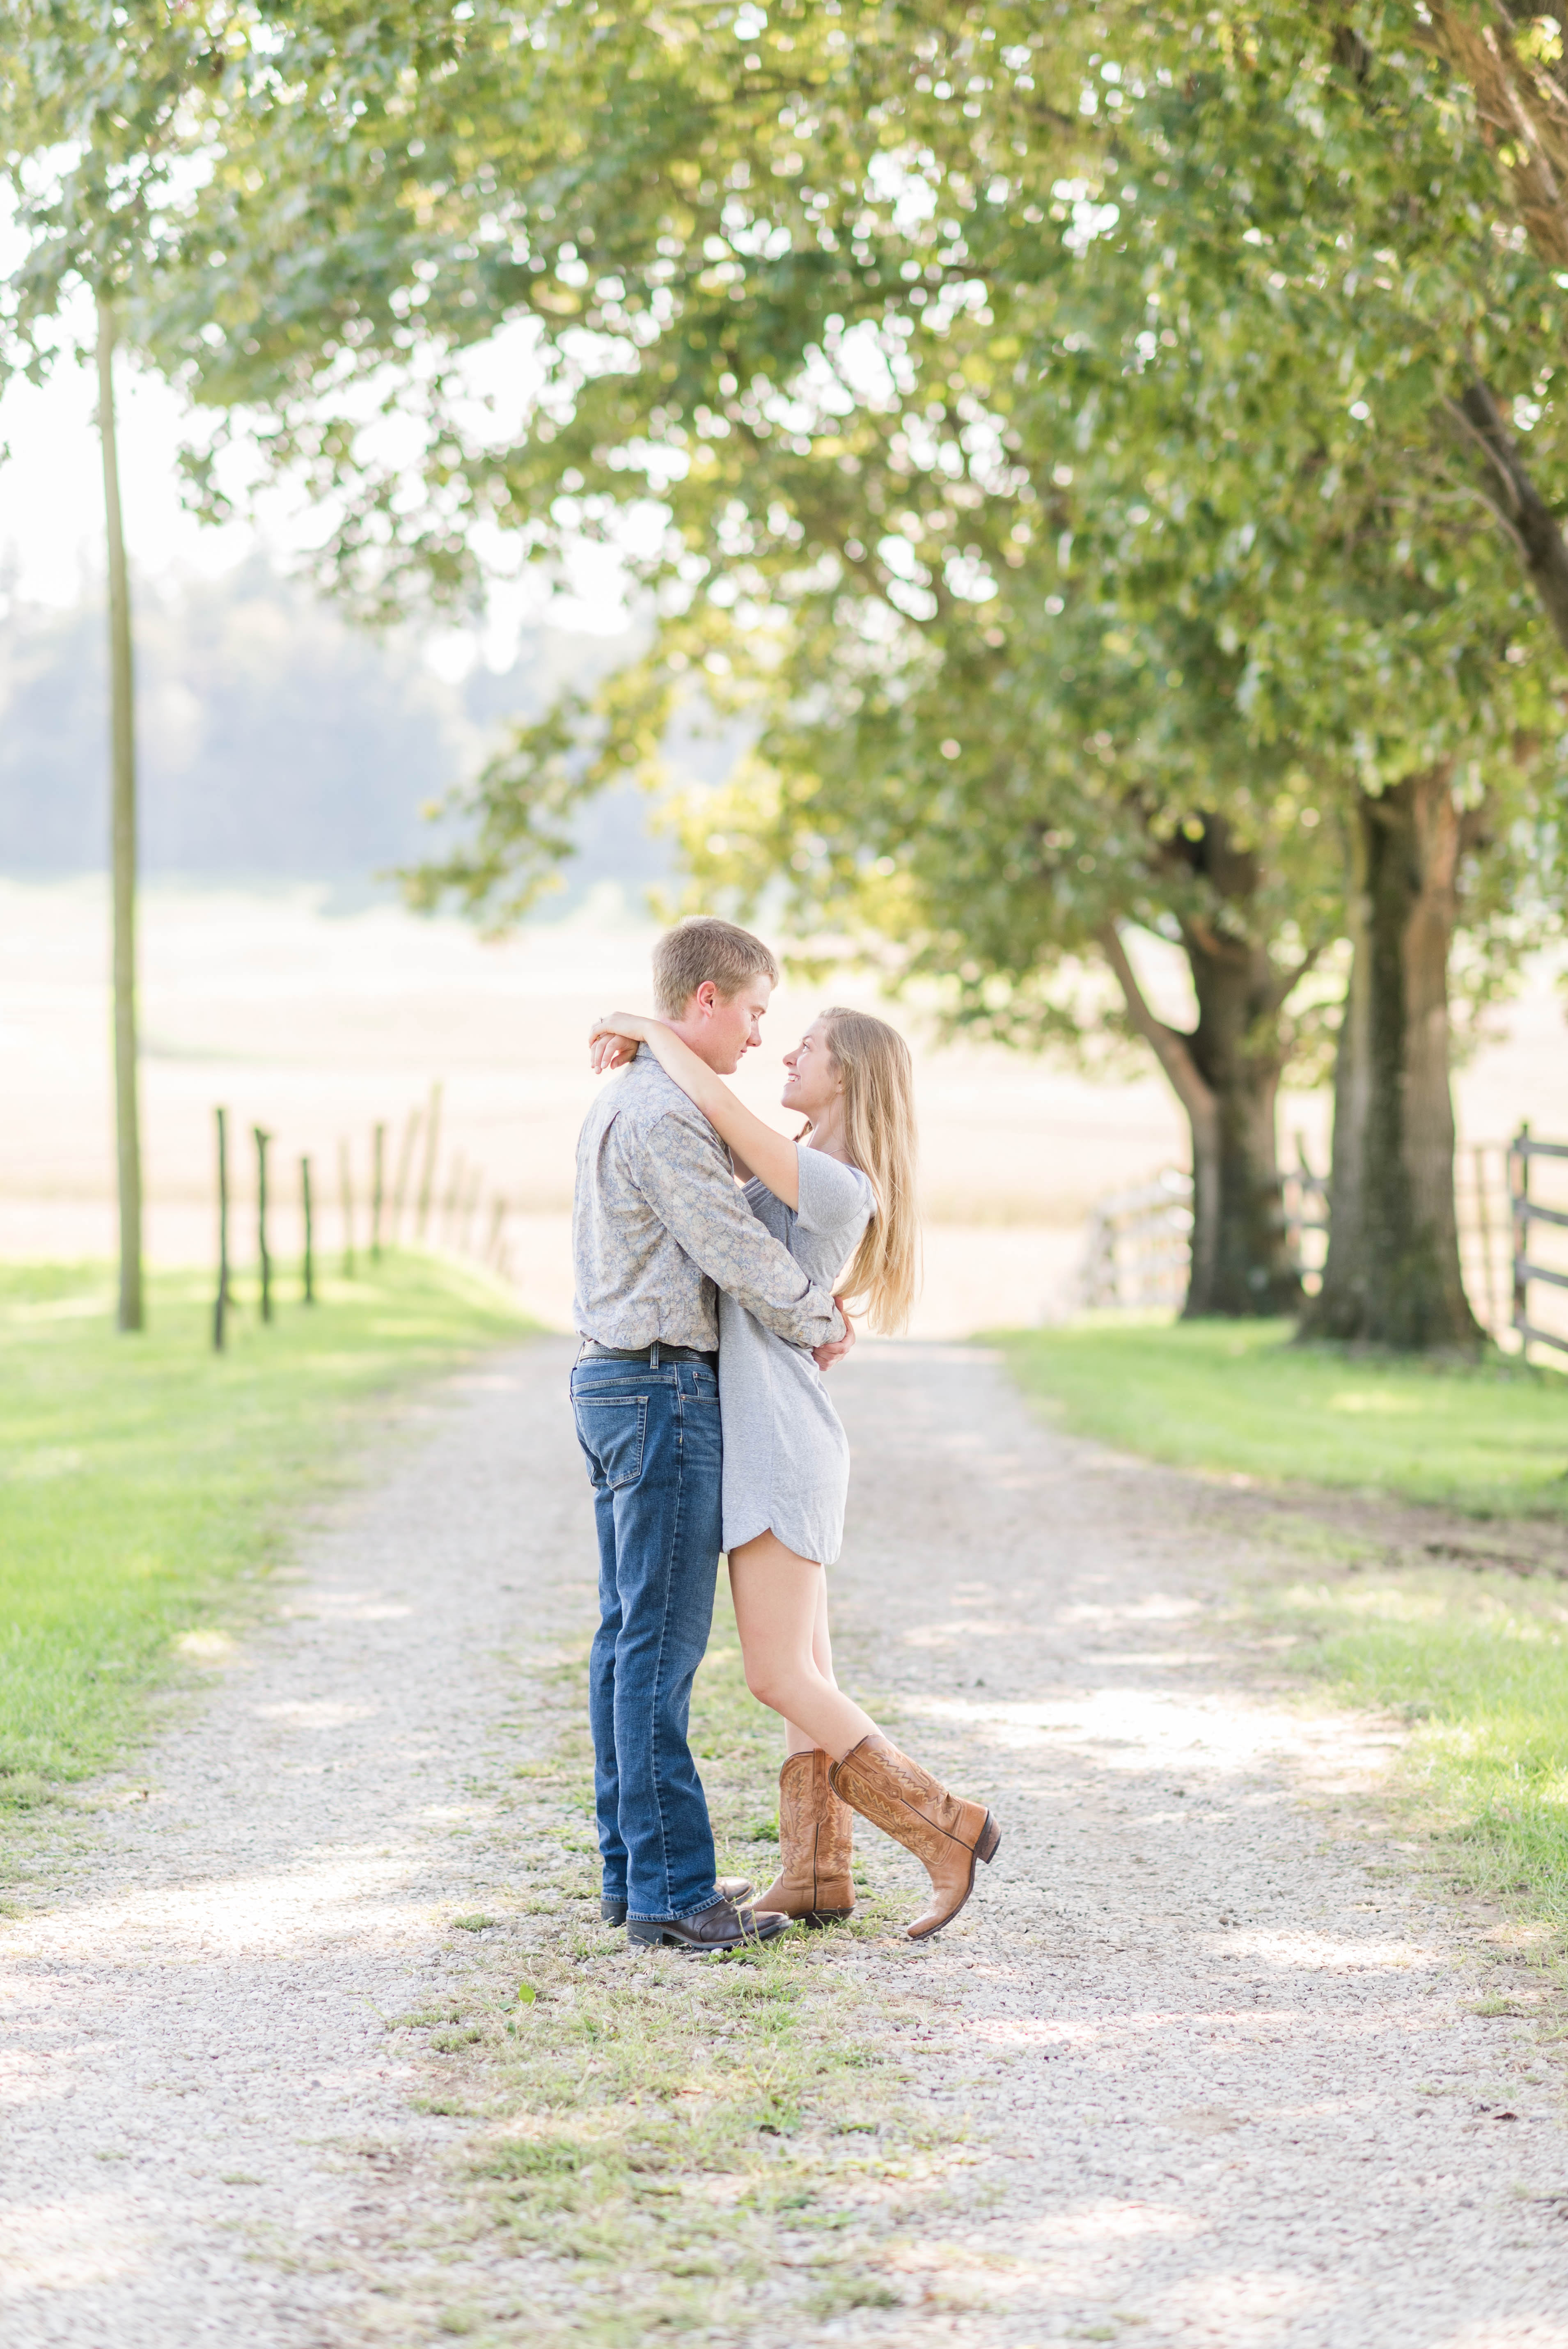 Countryside engagement session in marietta ohio - Sweet Williams photography, Rebecca musayev